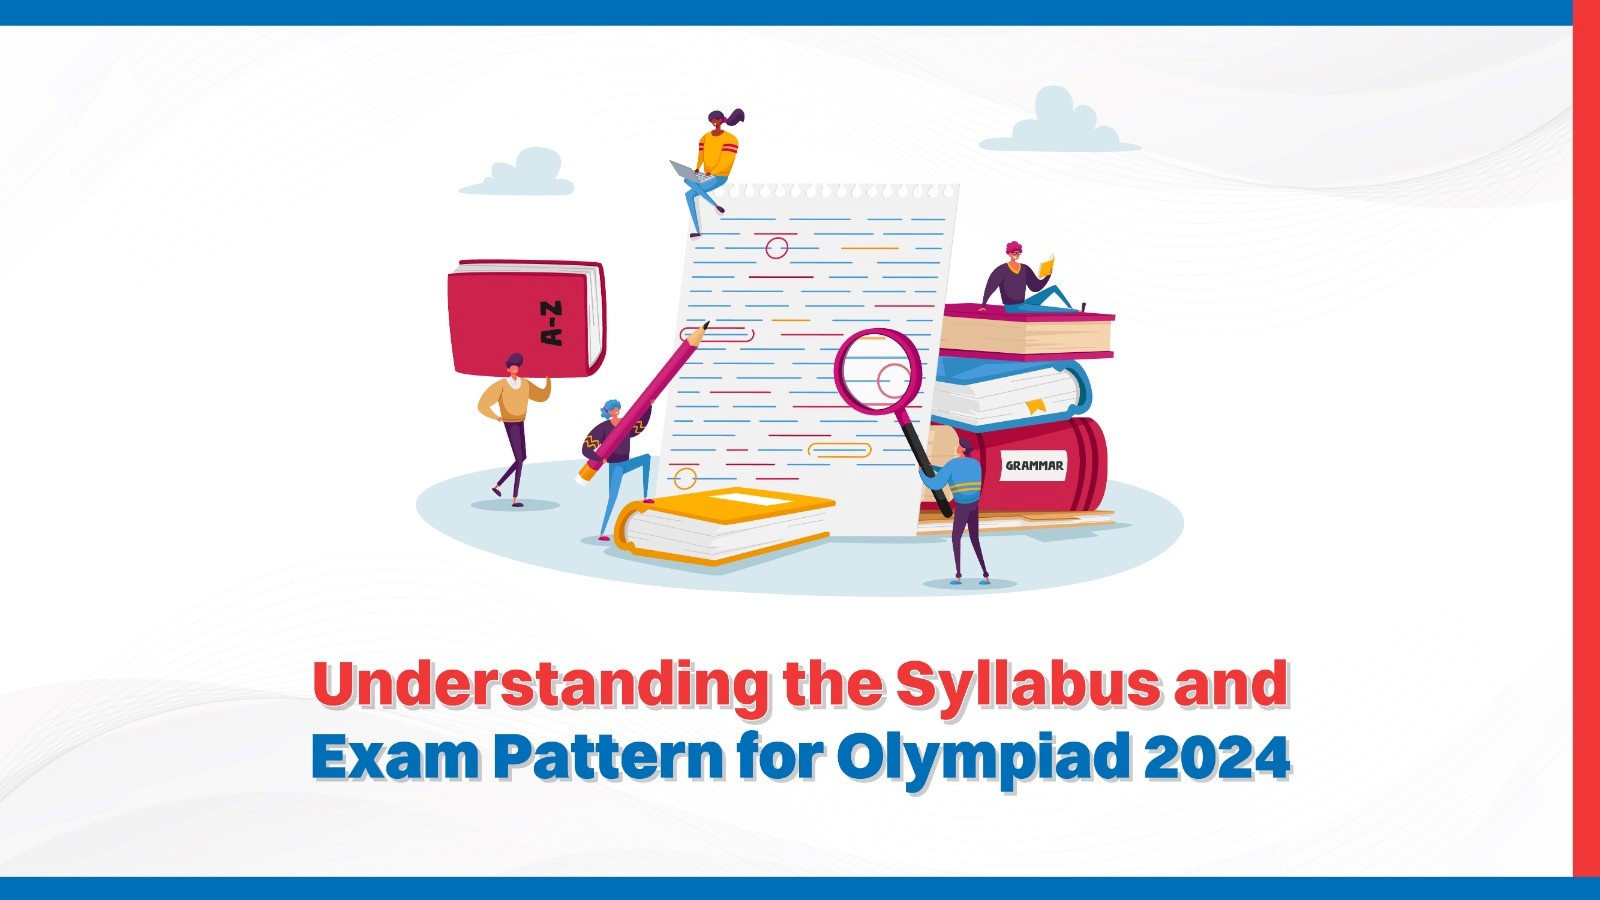 Understanding the Syllabus and Exam Pattern for Olympiad 2024.jpg